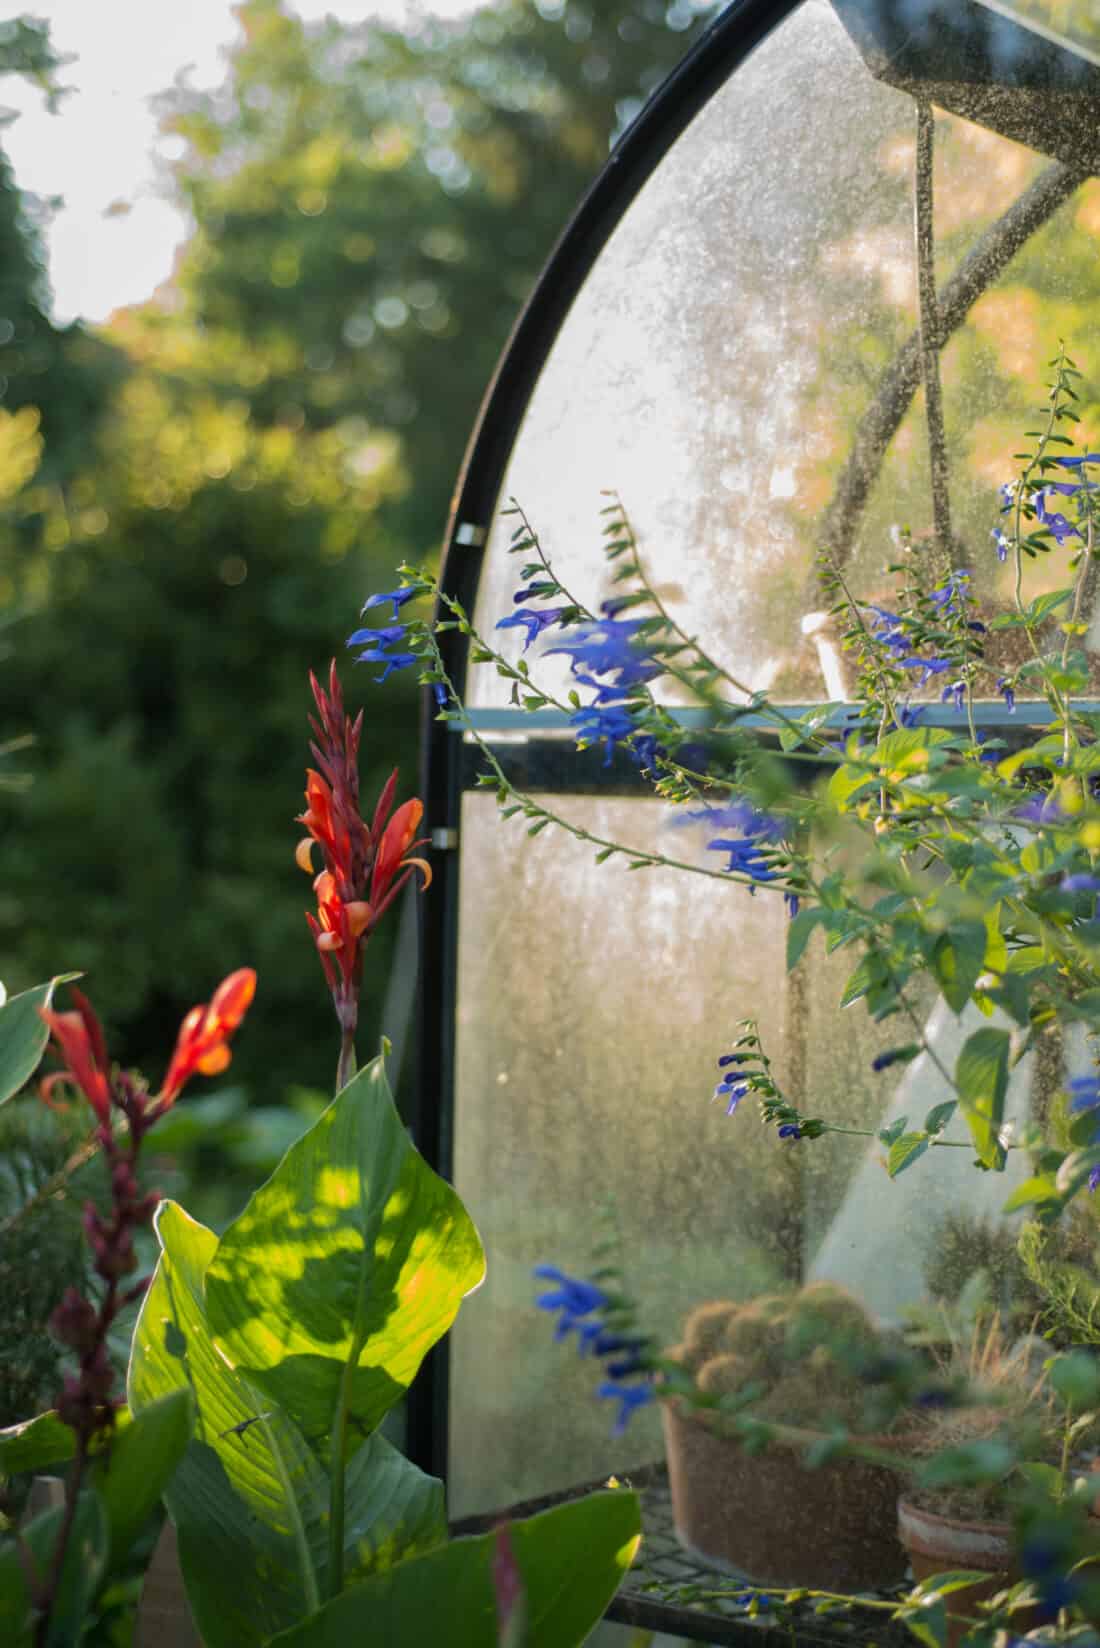 Lush garden plants including tall red and smaller blue flowers, with large green leaves, beautifully illuminated by sunlight beside a misted glass garden dome.